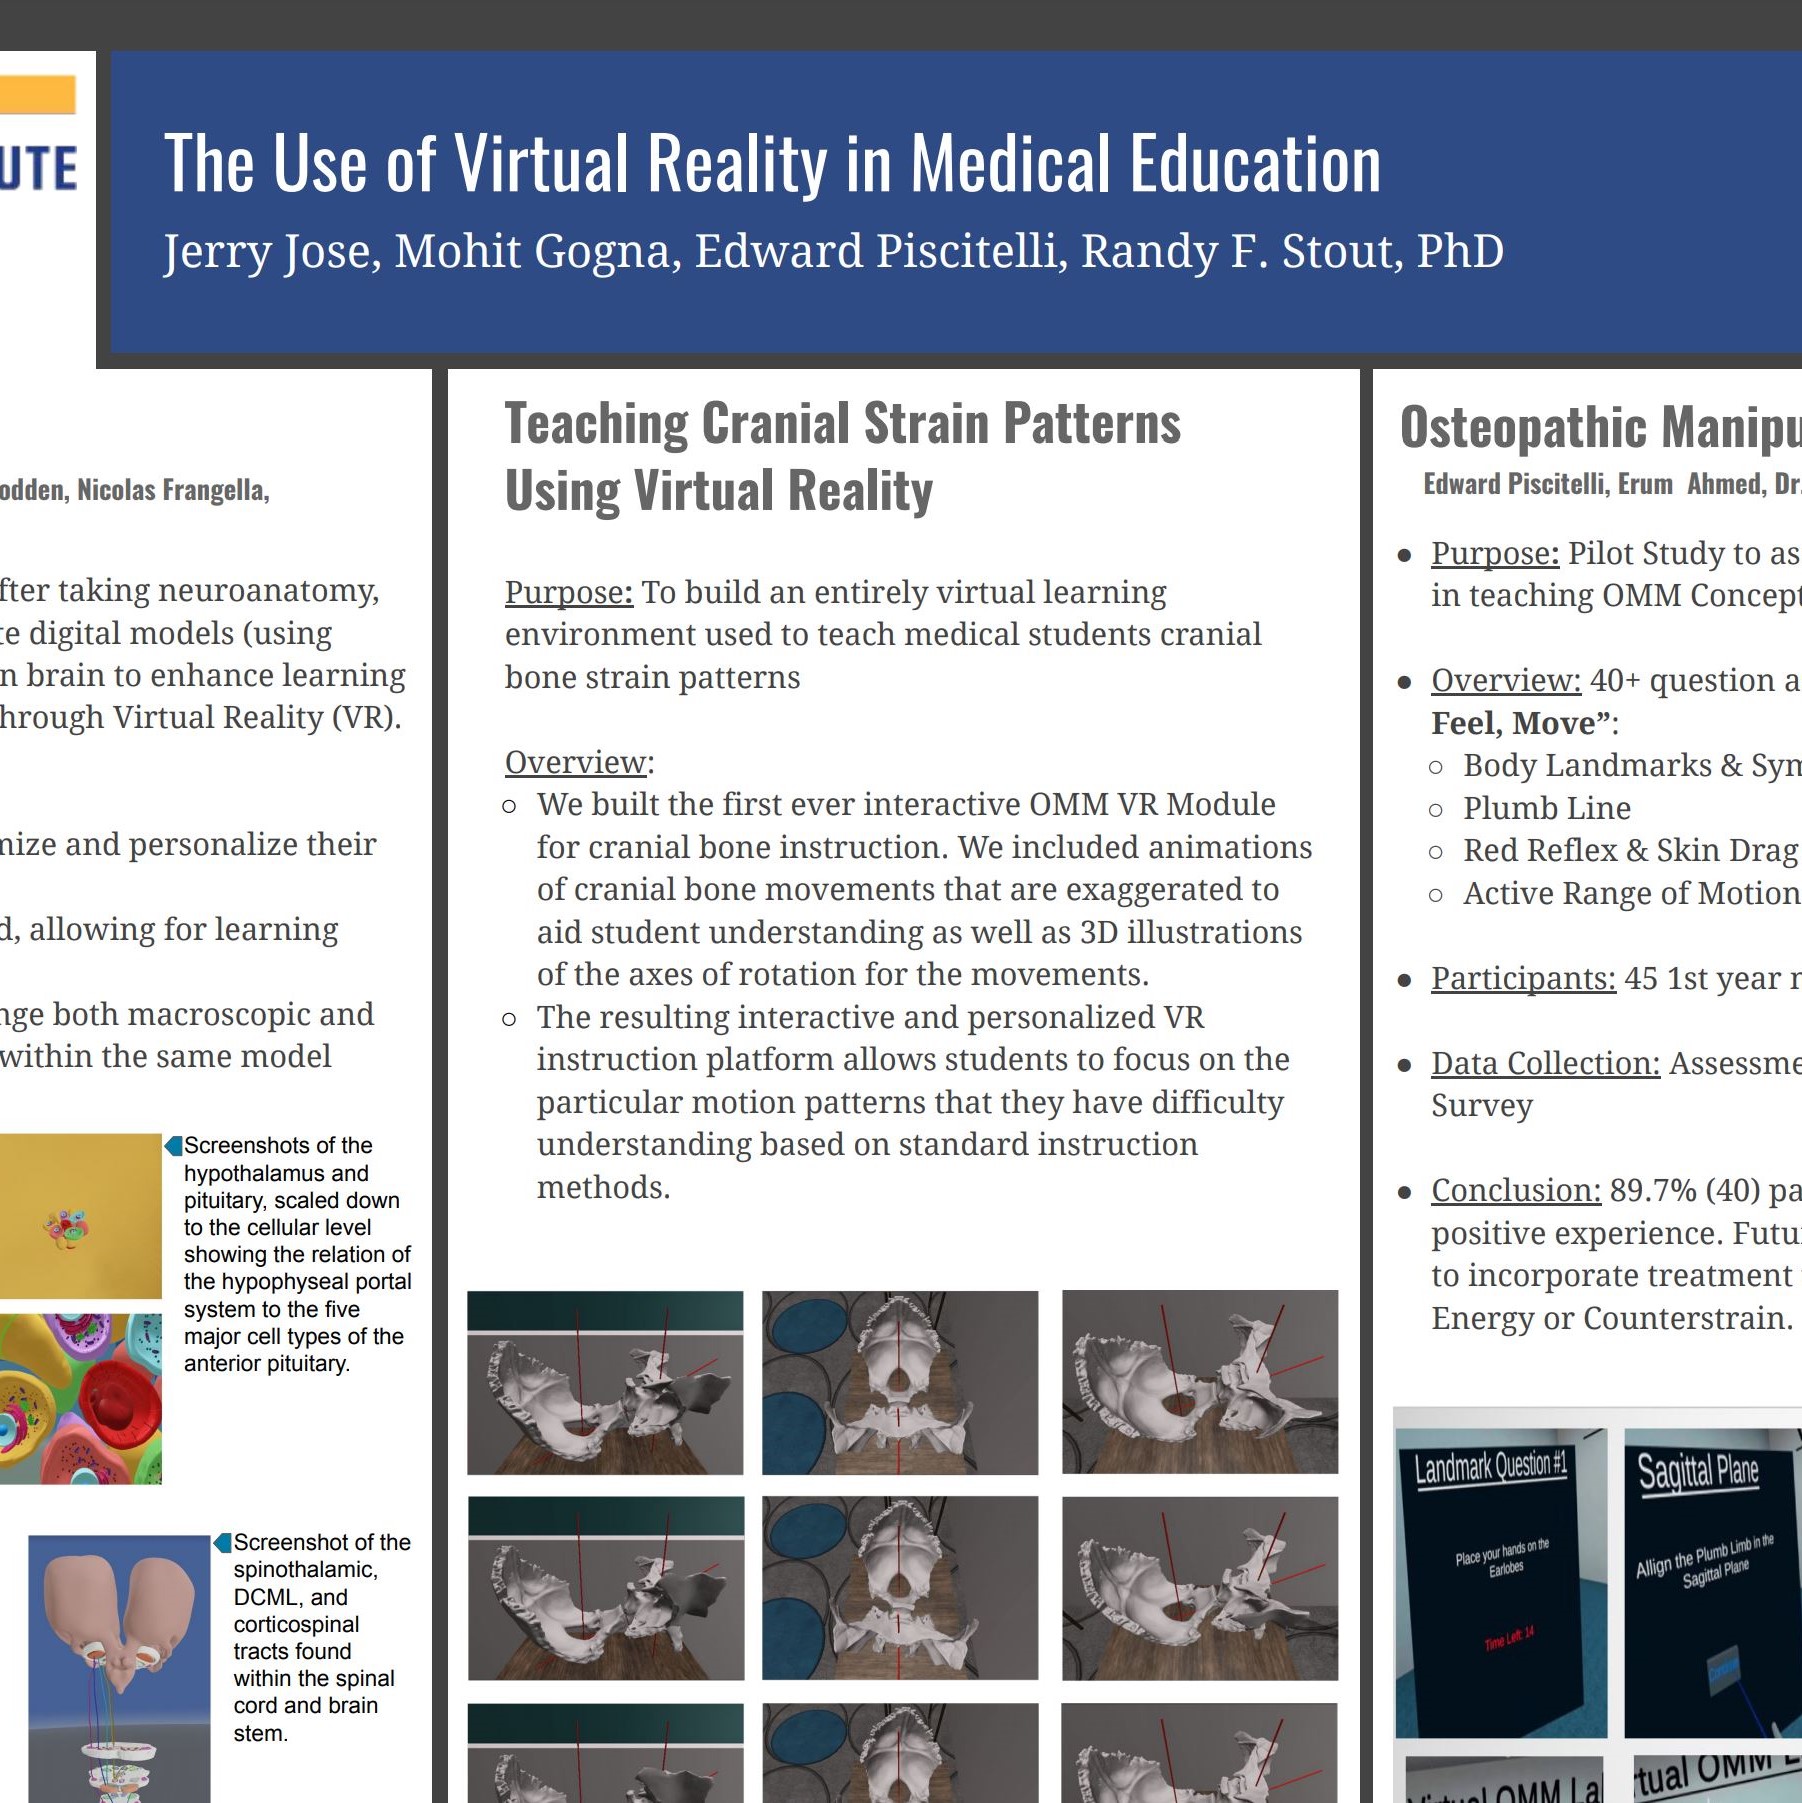 The Use of Virtual Reality in Medical Education